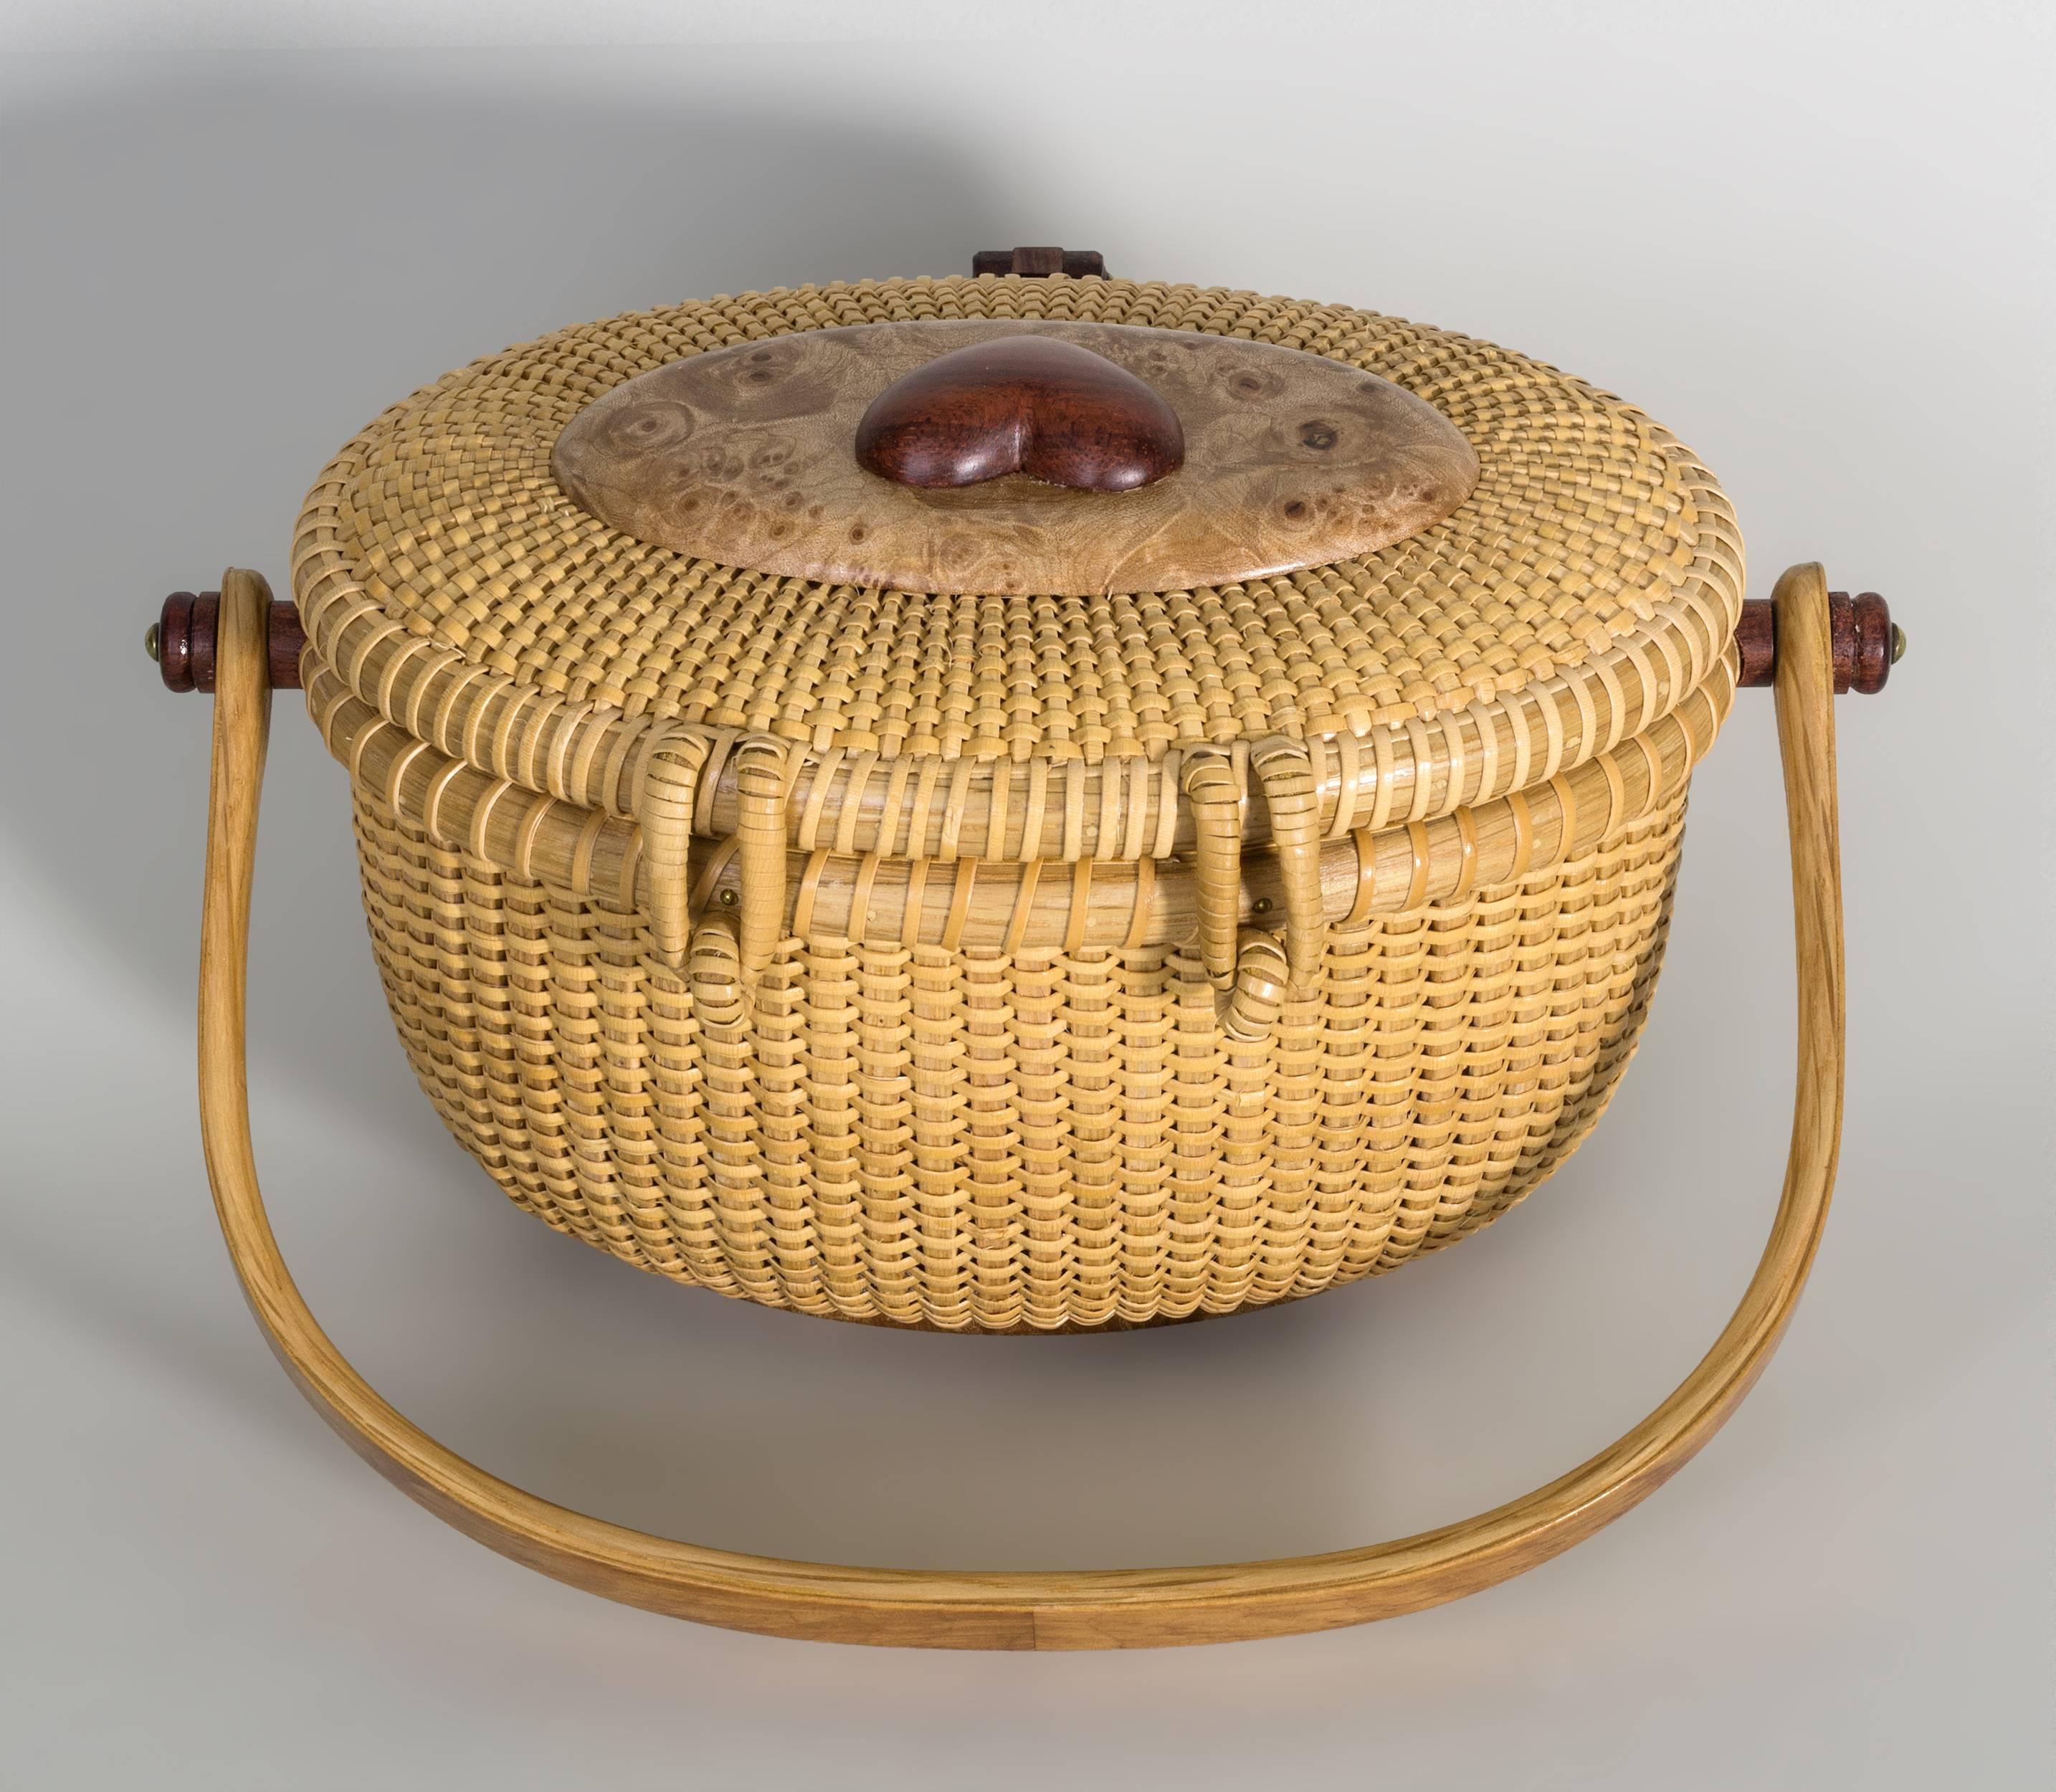 By Nap Plank of Nantucket, one of the top Nantucket Basket artists working contemporarily on the island.  This dainty basket features a burl maple overlaid carved and bent oak swing handle with exotic rosewood knobs, birdseye maple top surmounted by